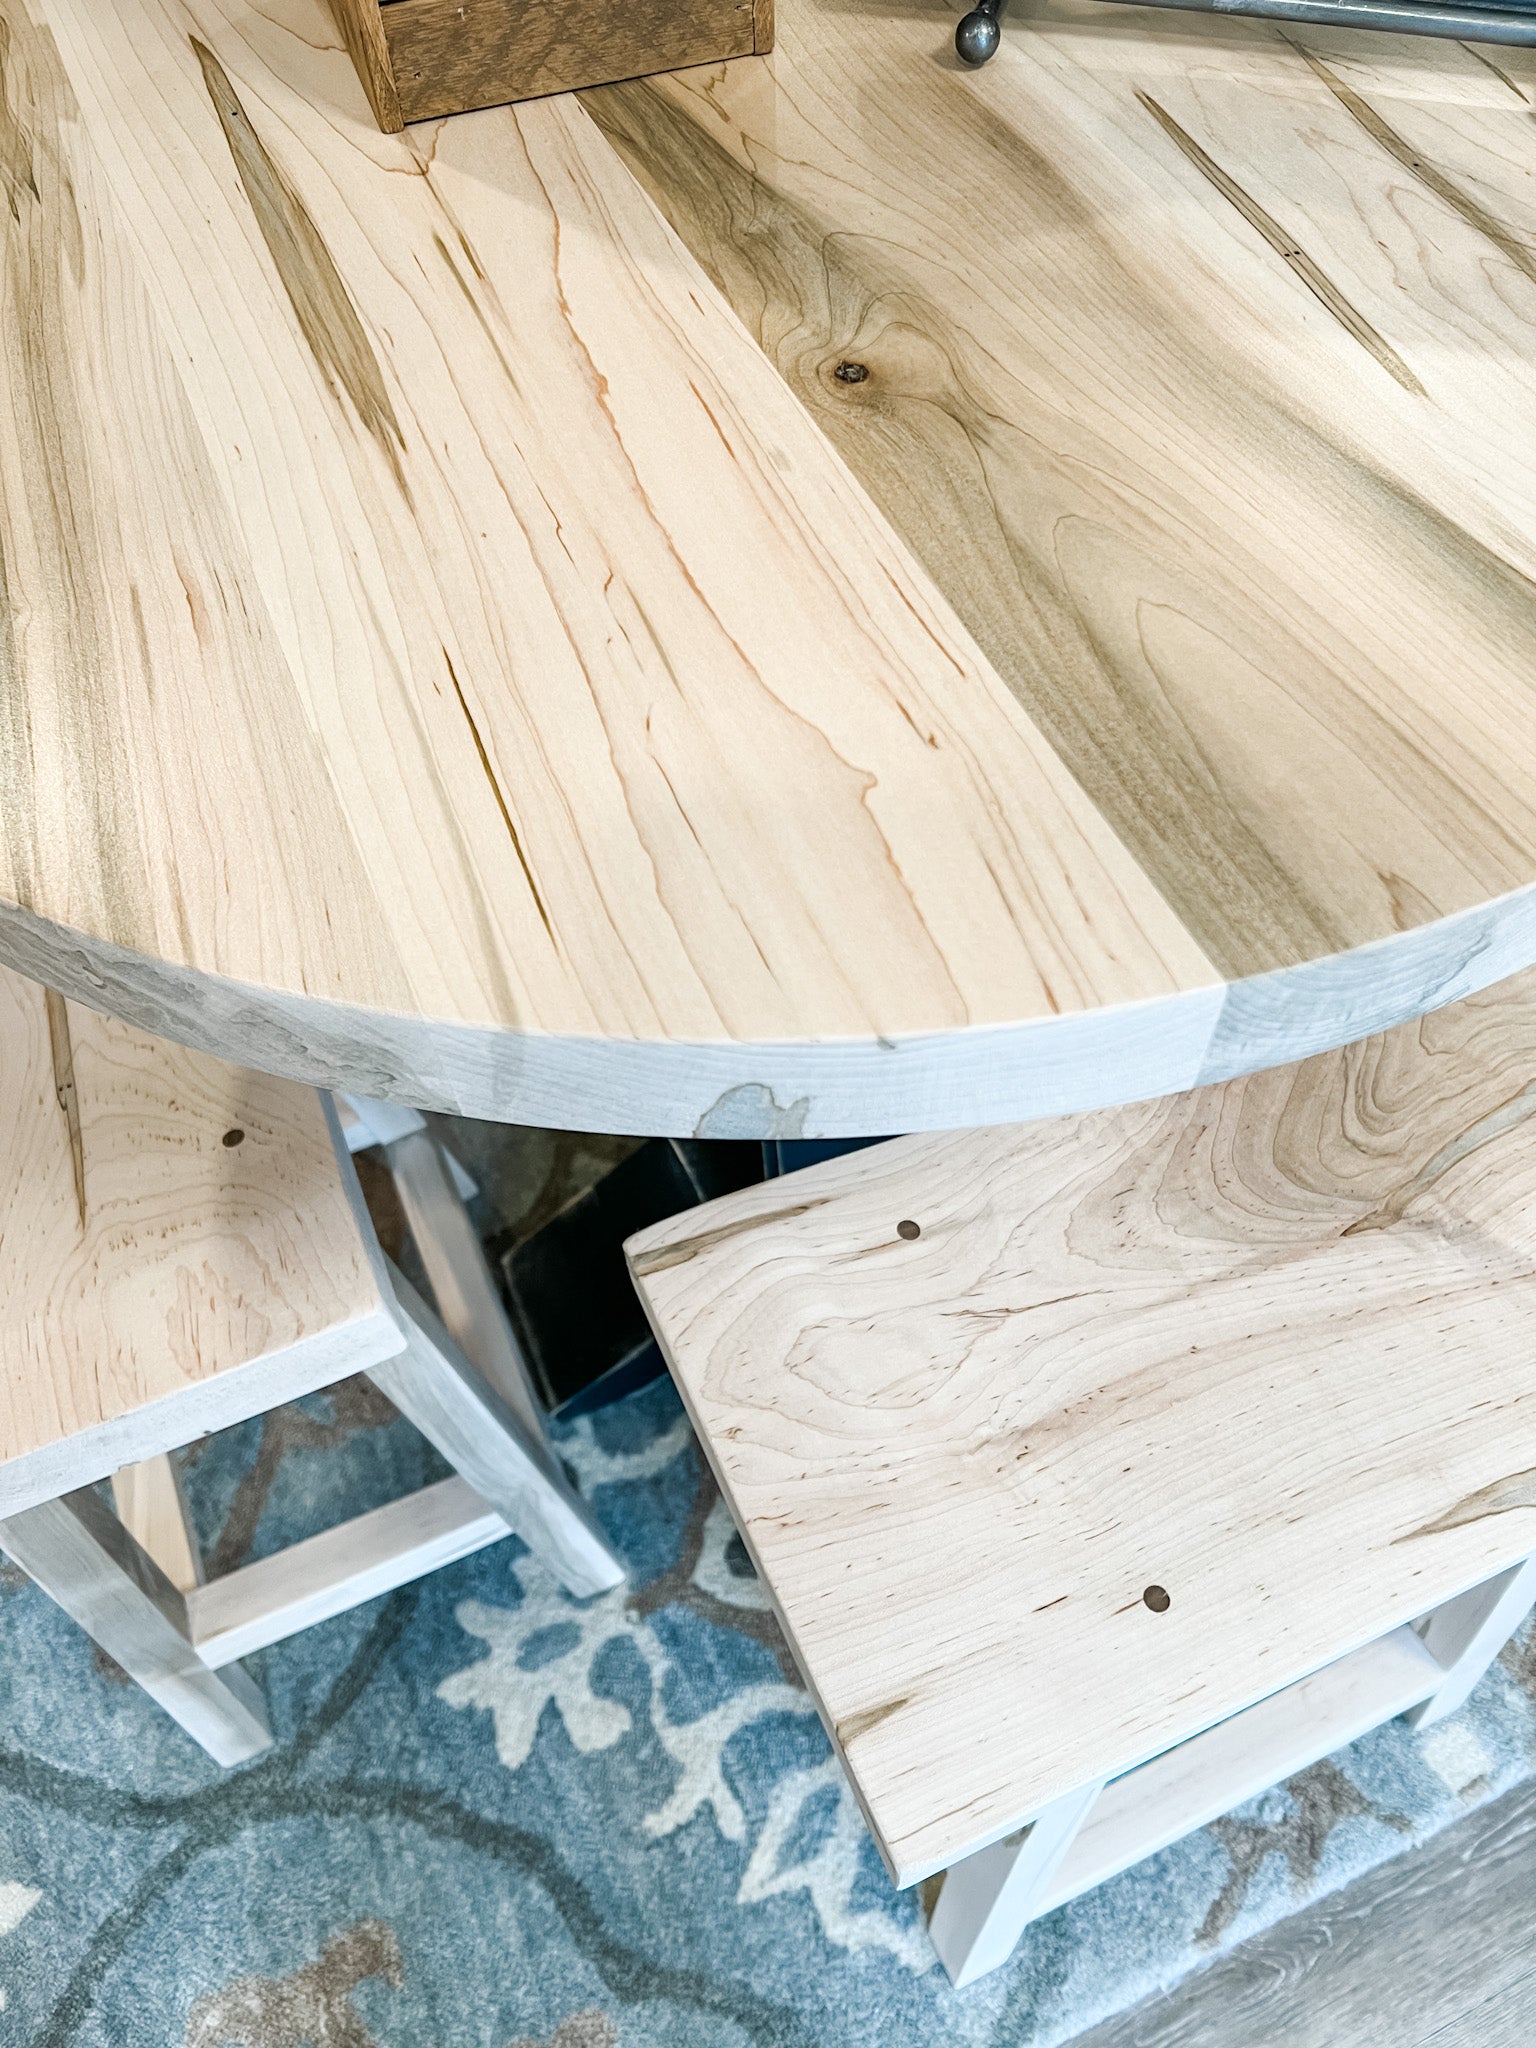 32" Round Wormy Maple Pub Table & Stools